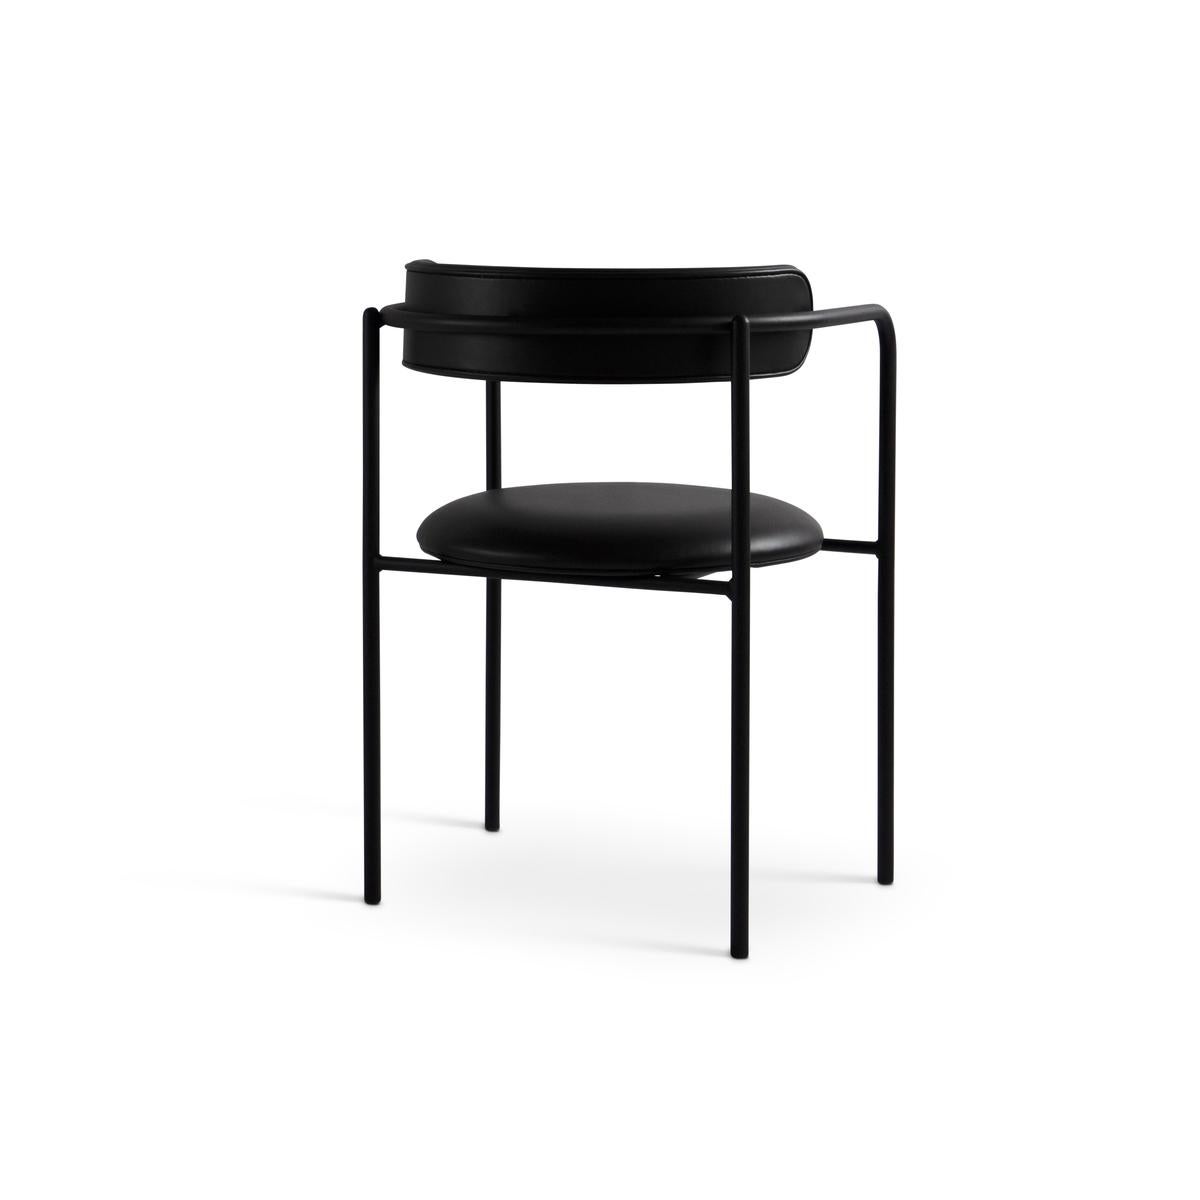 FF 4-legs, chair 
Design: Friends & Founders

Upholstery available in a wide range of fabrics and leathers
Model shown (fabric): Nevotex, Dakar 0842

Legs: 
4 legs or cantilever
Black steel or chrome

Back:
Rounded or cubic


Price may vary